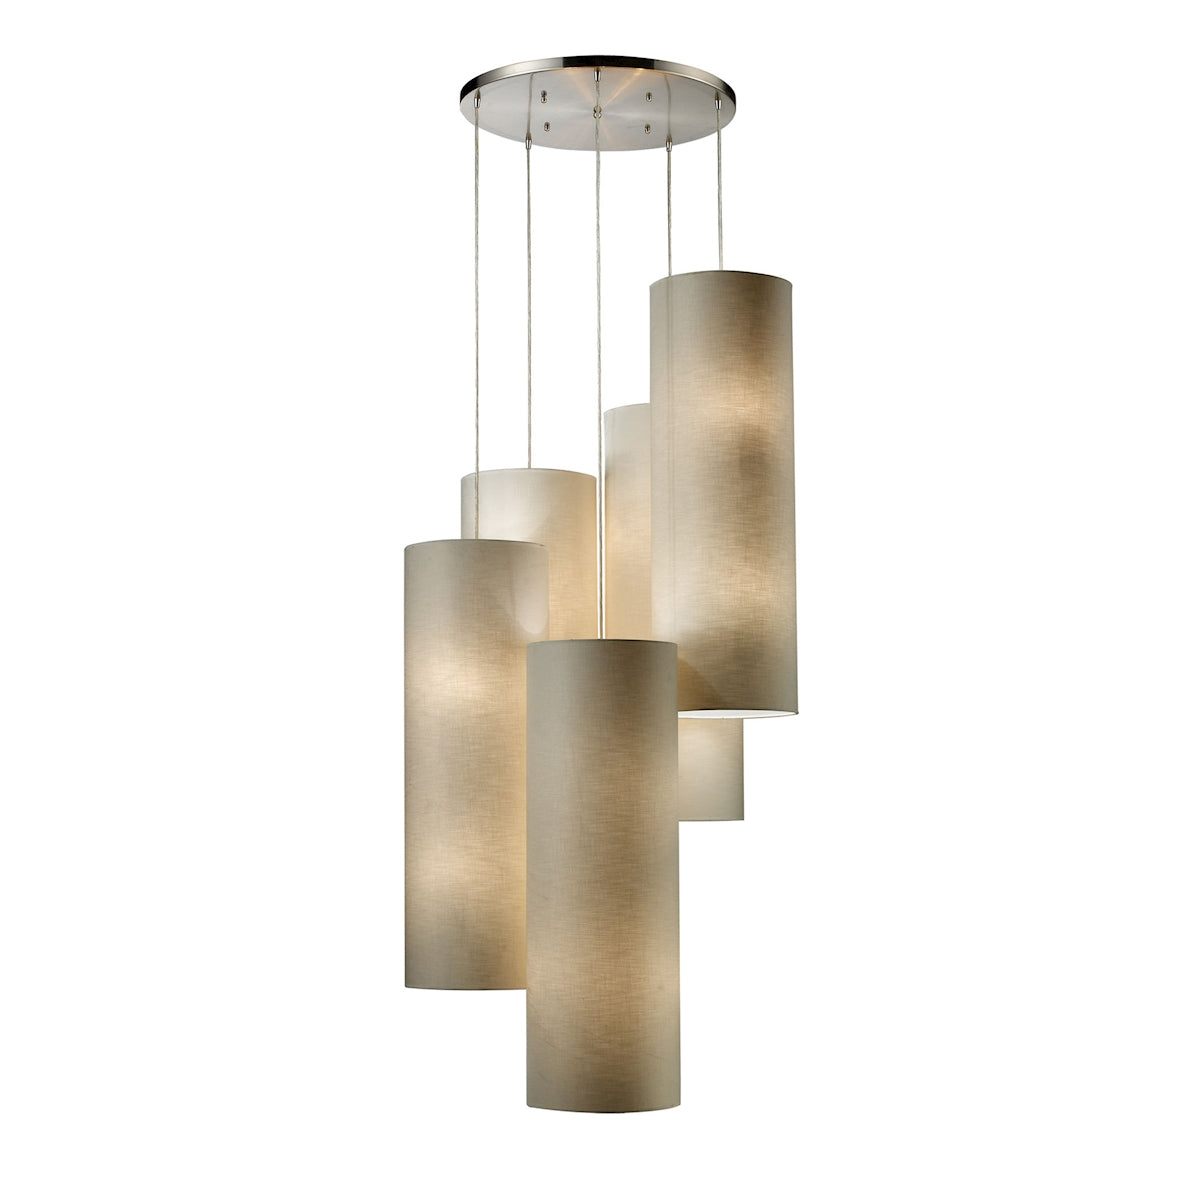 ELK Lighting 20160/20R Fabric Cylinders 20-Light Chandelier in Satin Nickel with 5 Shades